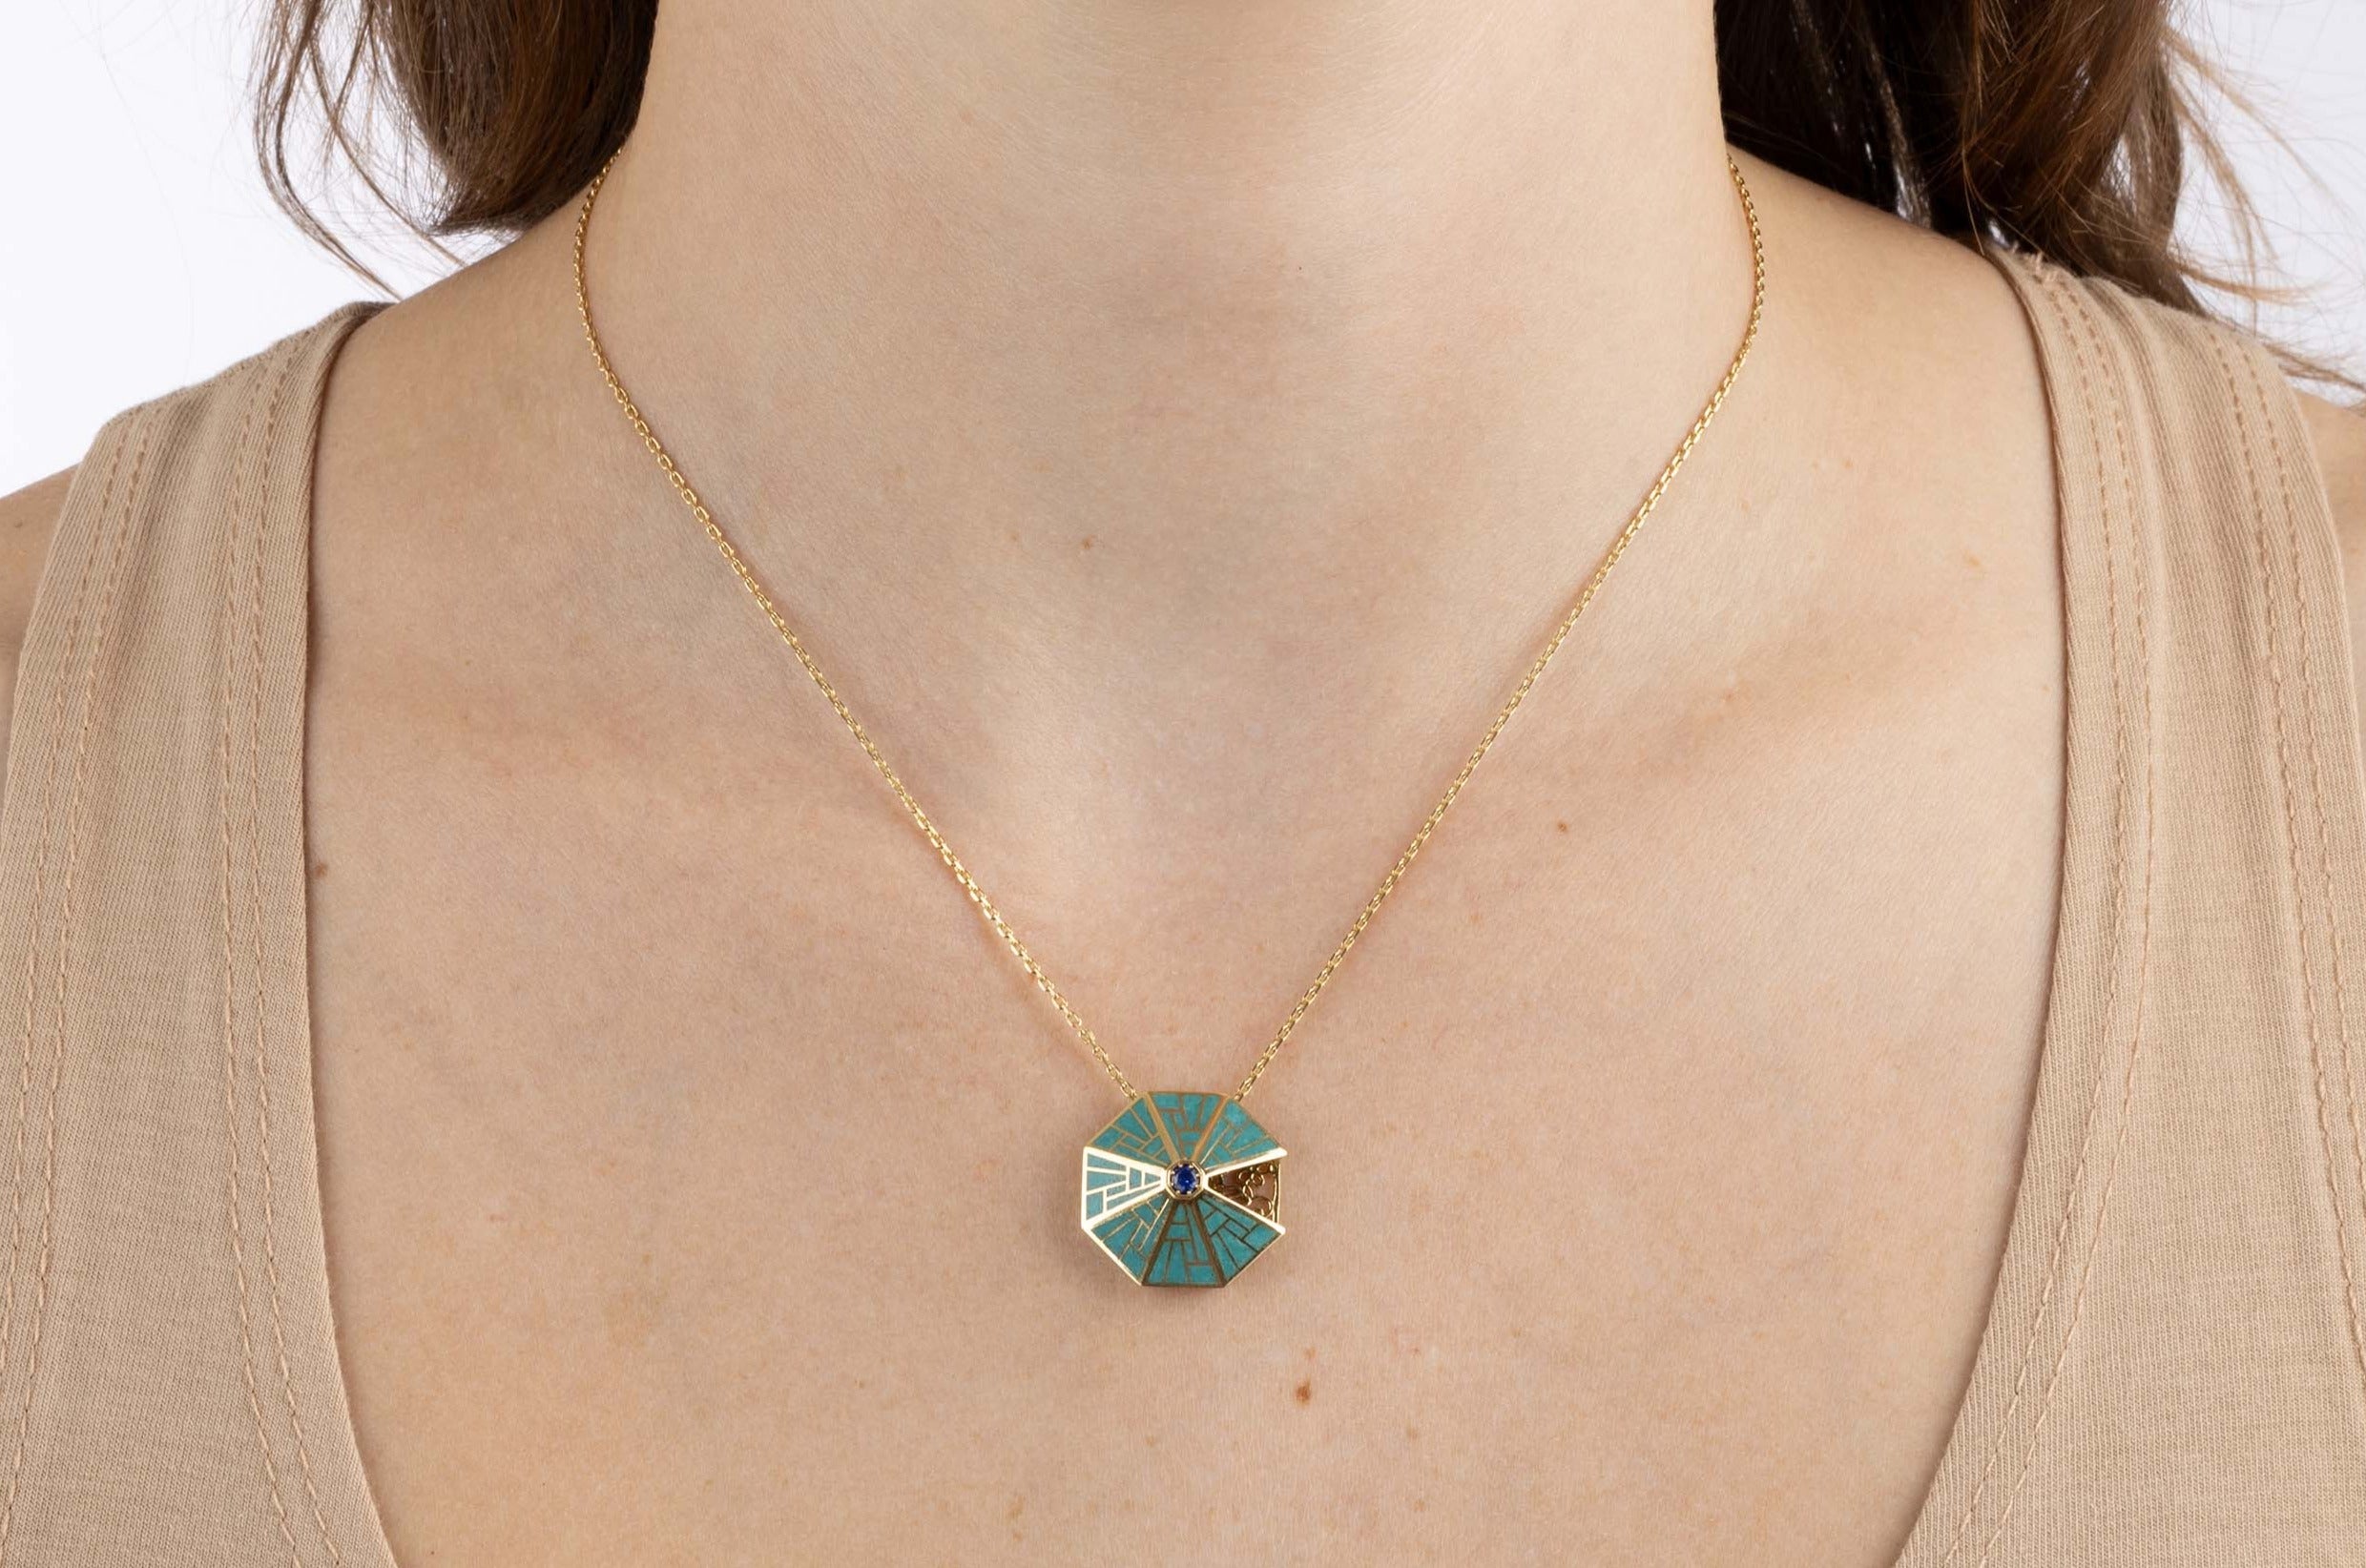 Yellow Gold octagon Necklace with Turquoise Cloisonne and a Blue Sapphire, Medium - Model shot